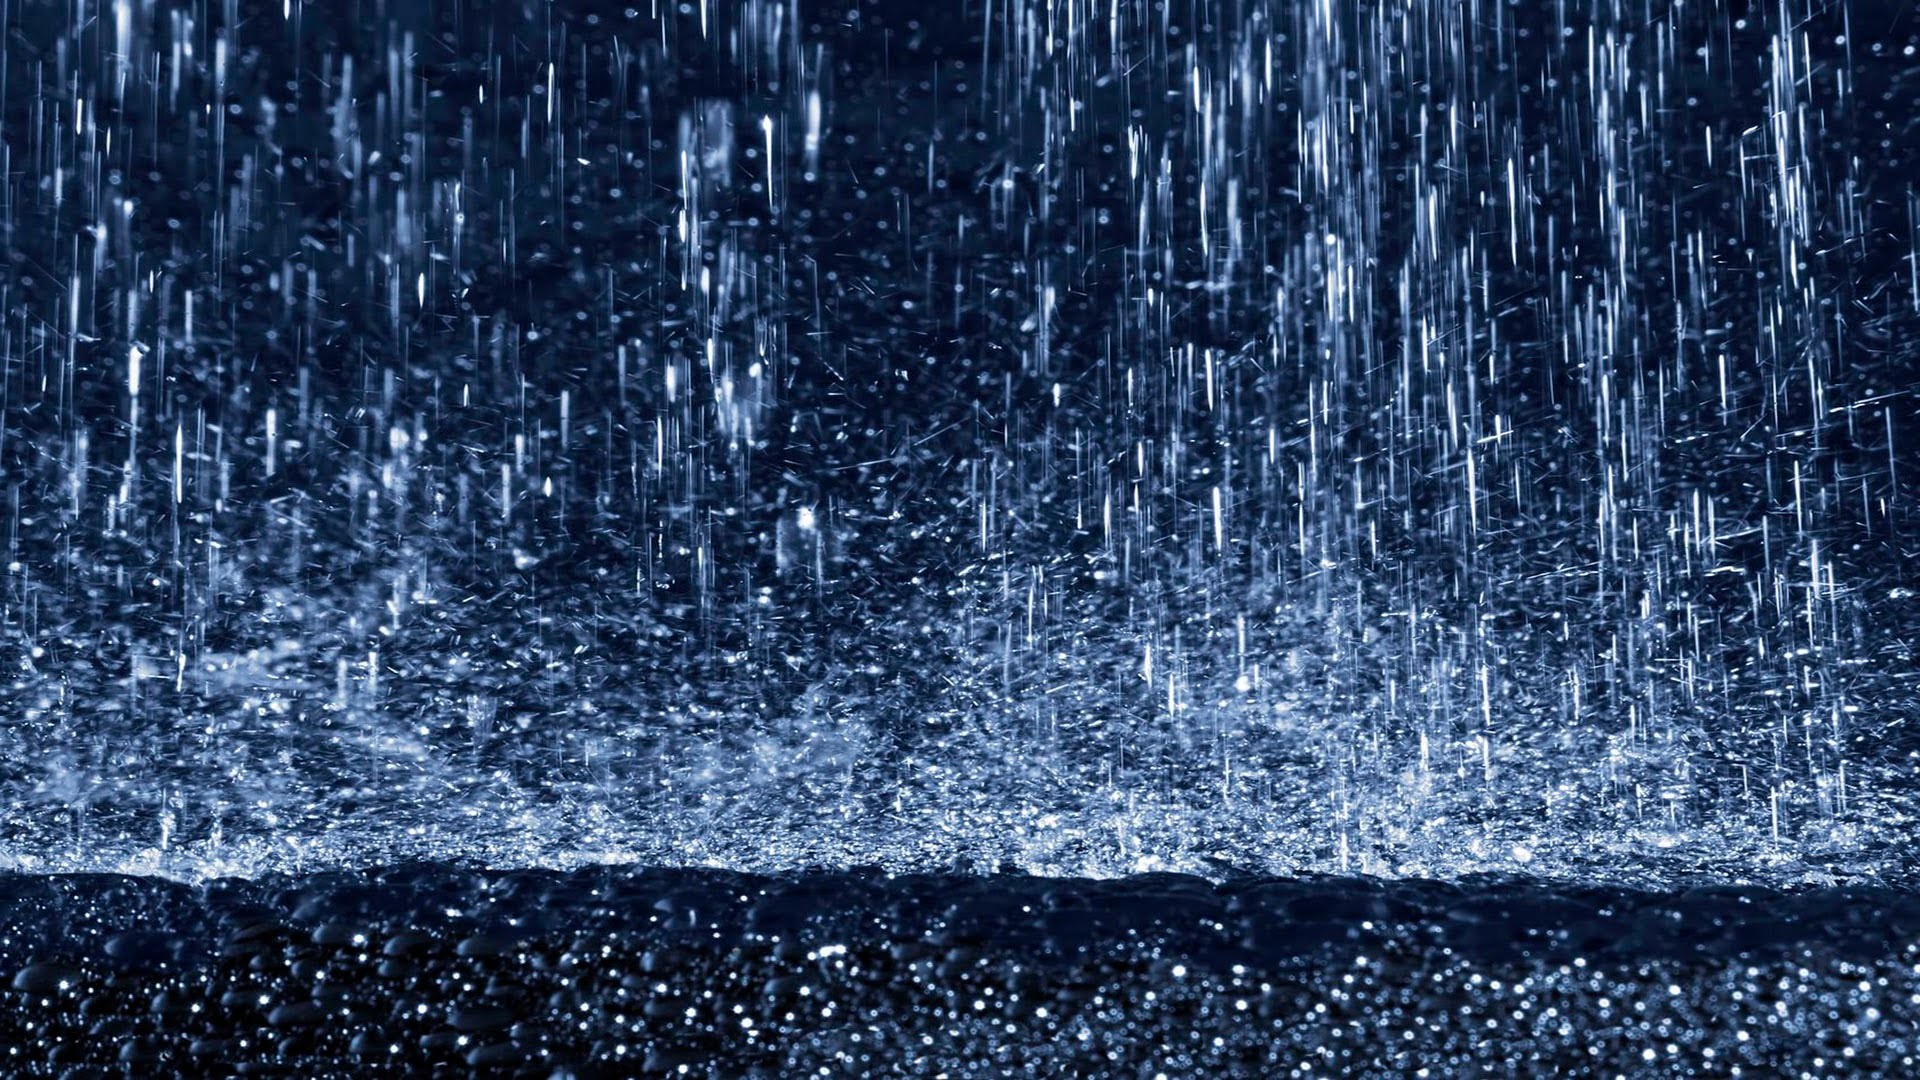 1920x1080 Rain Images Collection (45+) - HD Wallpapers